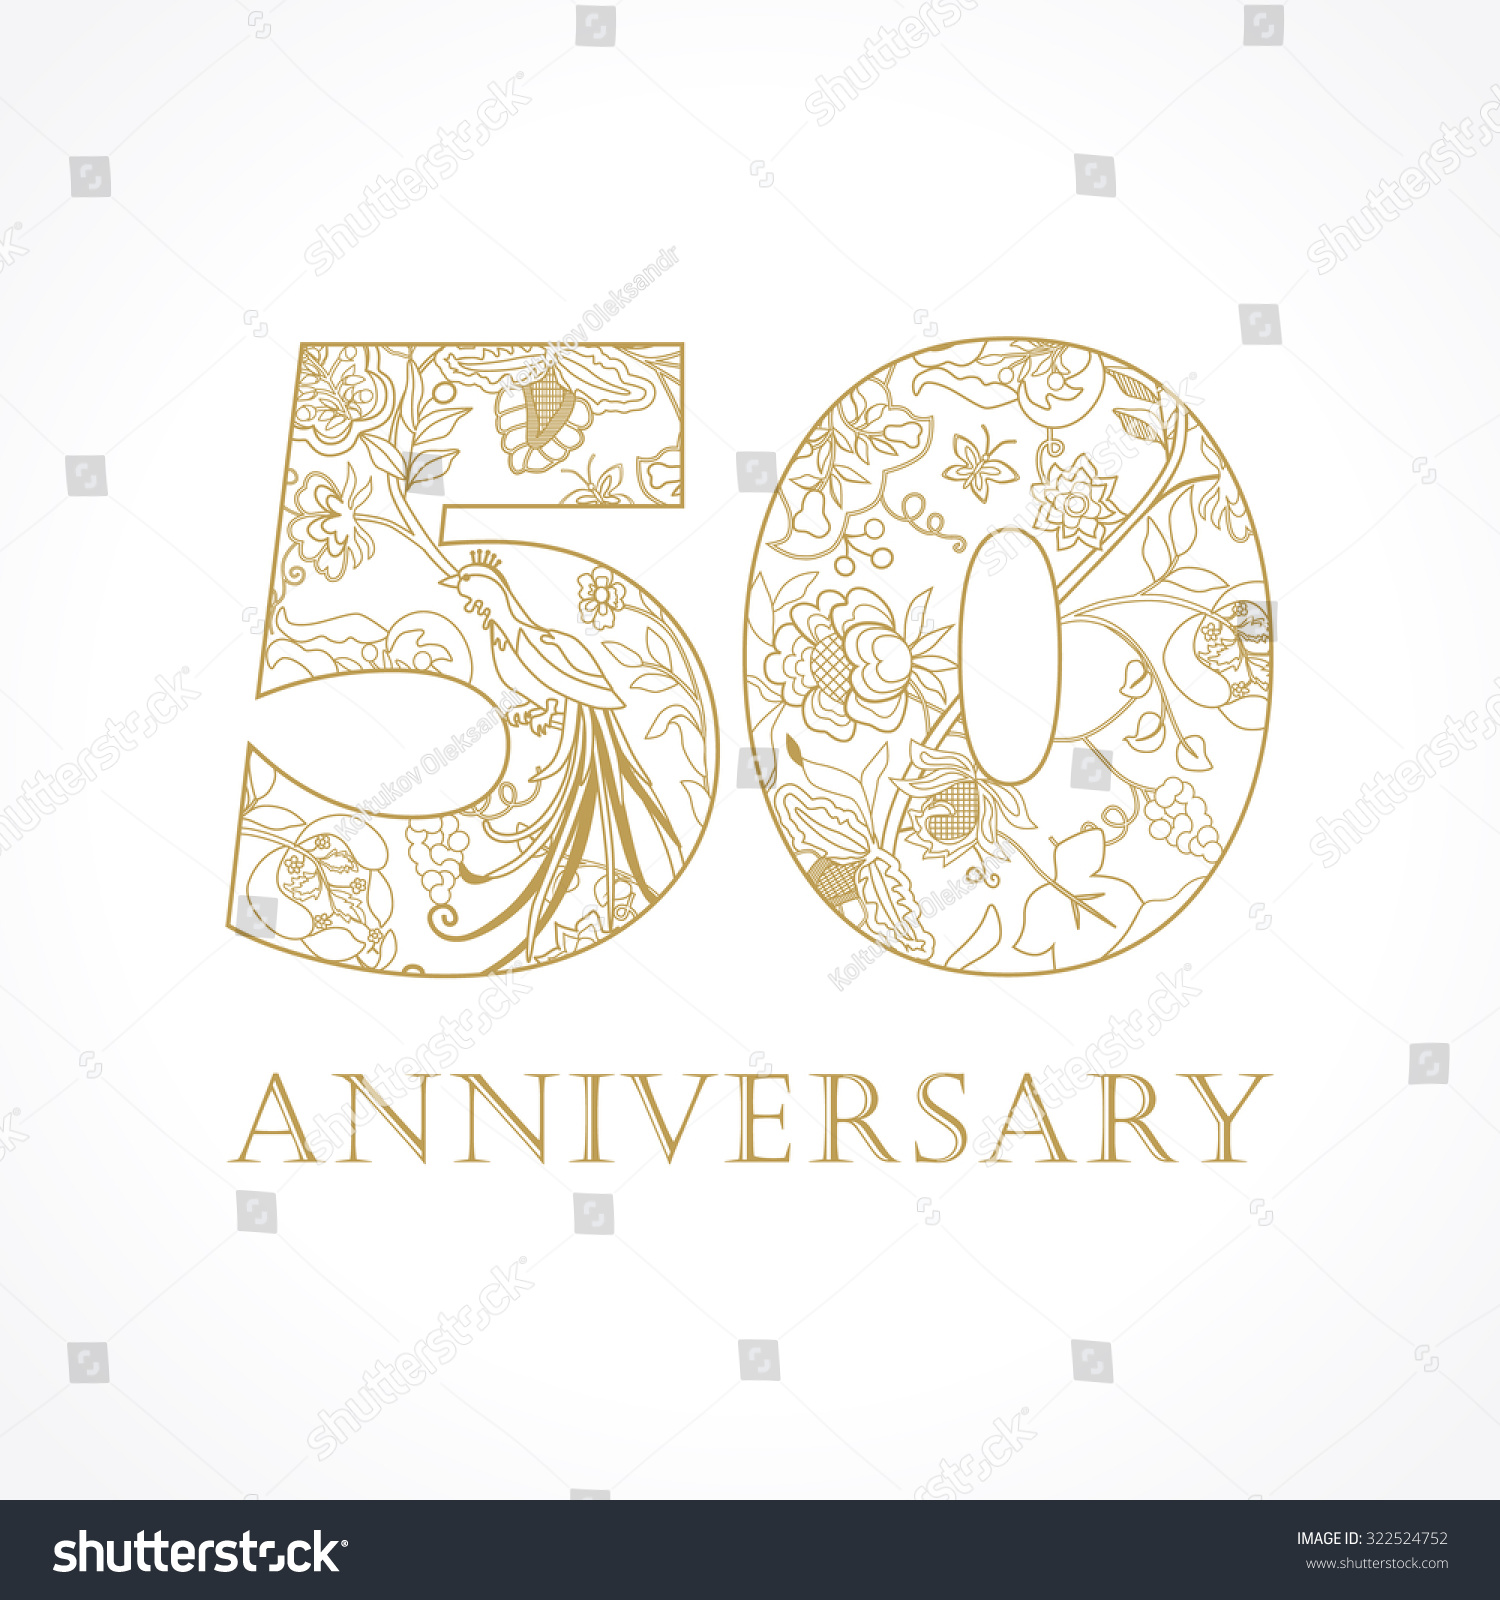 SVG of Creative logo concept of 50th anniversary in ethnic patterns and birds of paradise. Isolated abstract graphic design template. Top 50 sign. 50% percent off shopping sale. svg